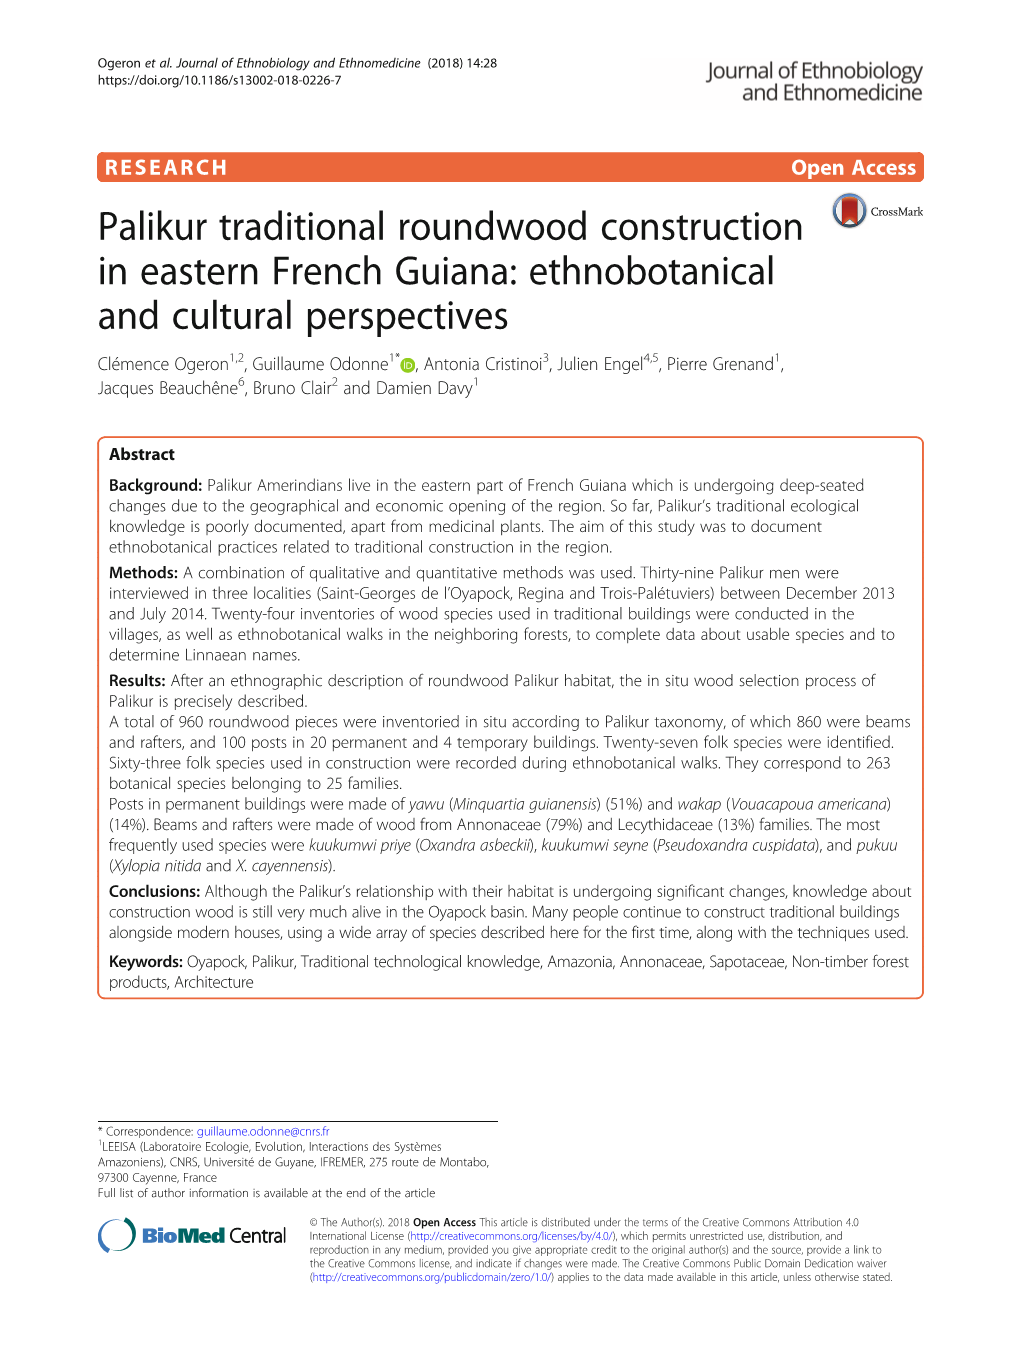 Palikur Traditional Roundwood Construction in Eastern French